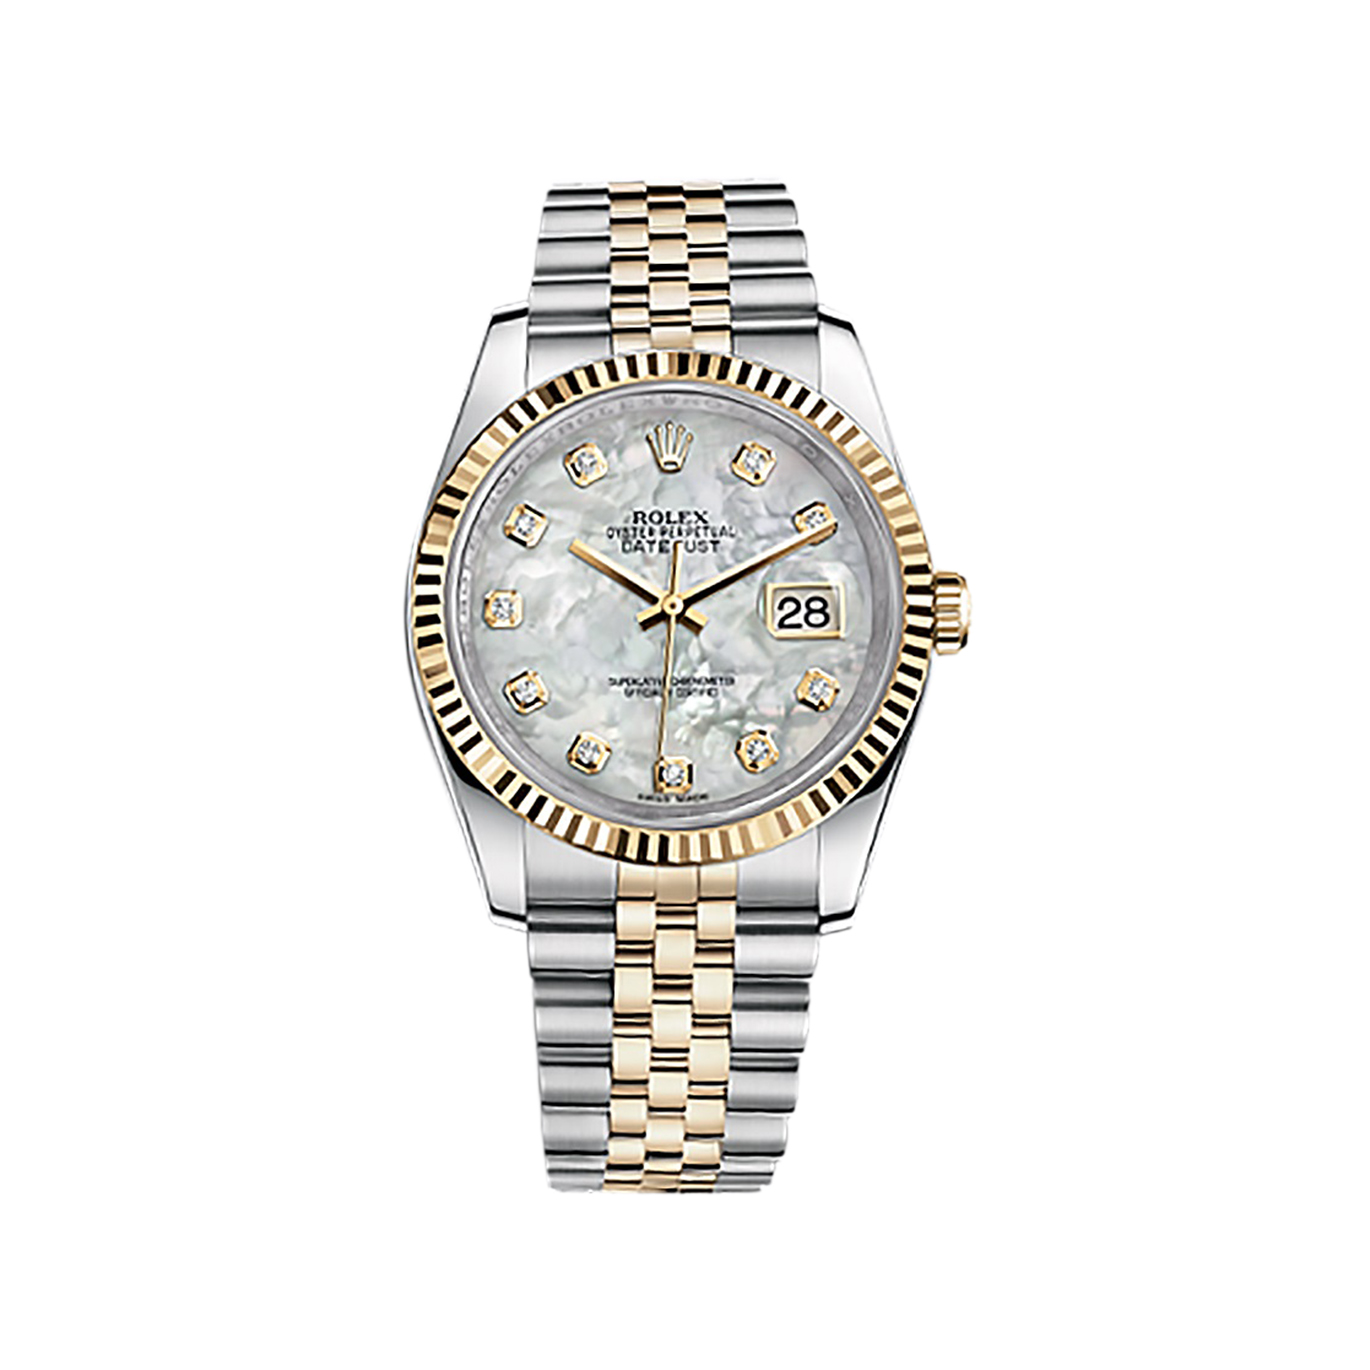 Datejust 36 116233 Gold & Stainless Steel Watch (White Mother-of-Pearl Set with Diamonds)